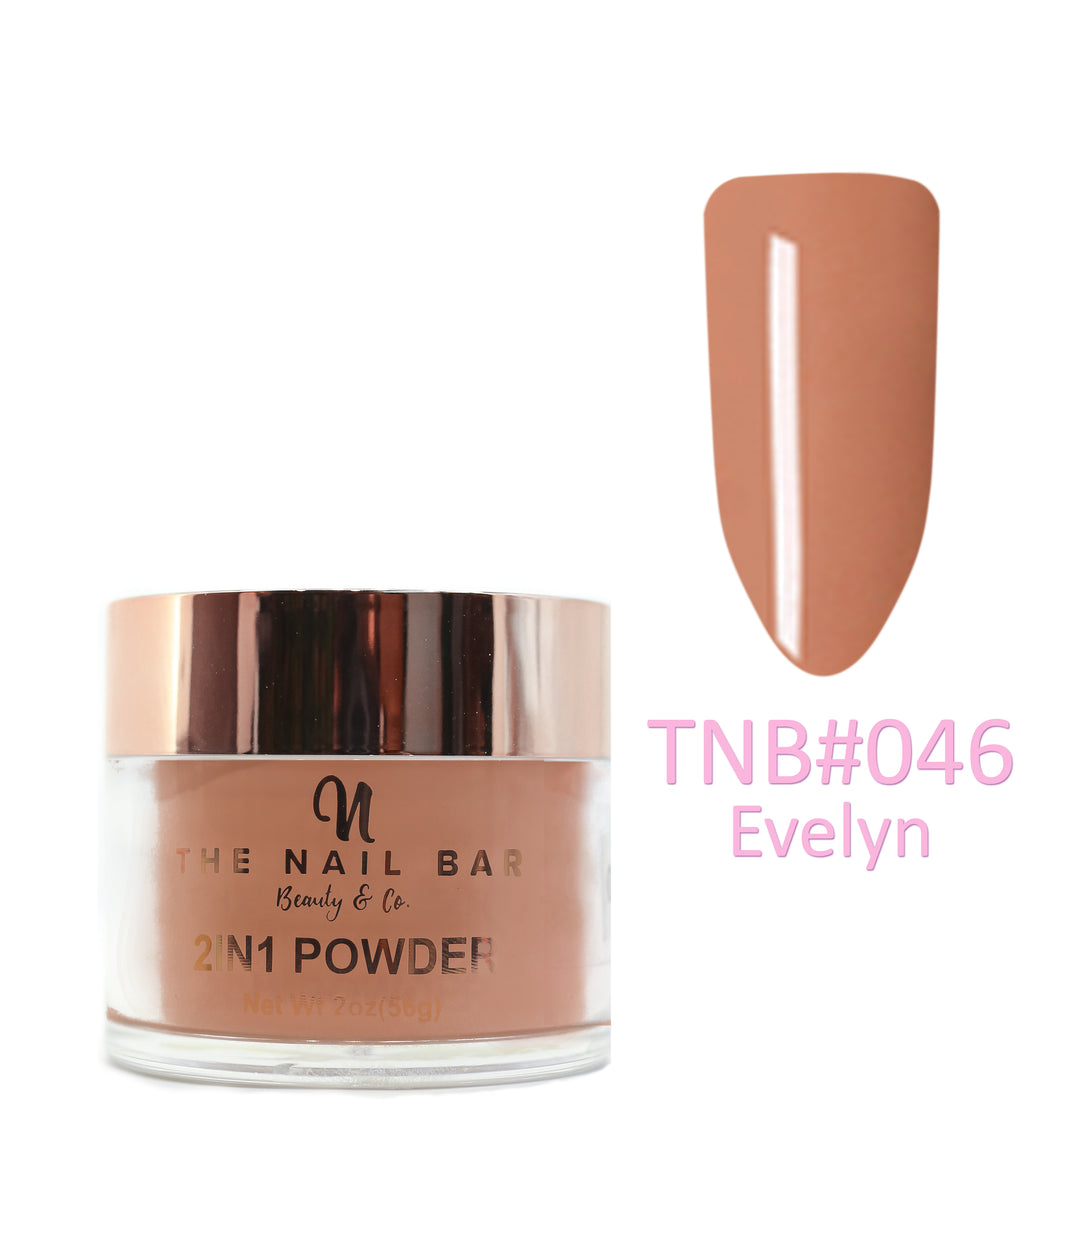 2-In-1 Dipping/Acrylic colour powder (2oz) -Evelyn - The Nail Bar Beauty & Co.